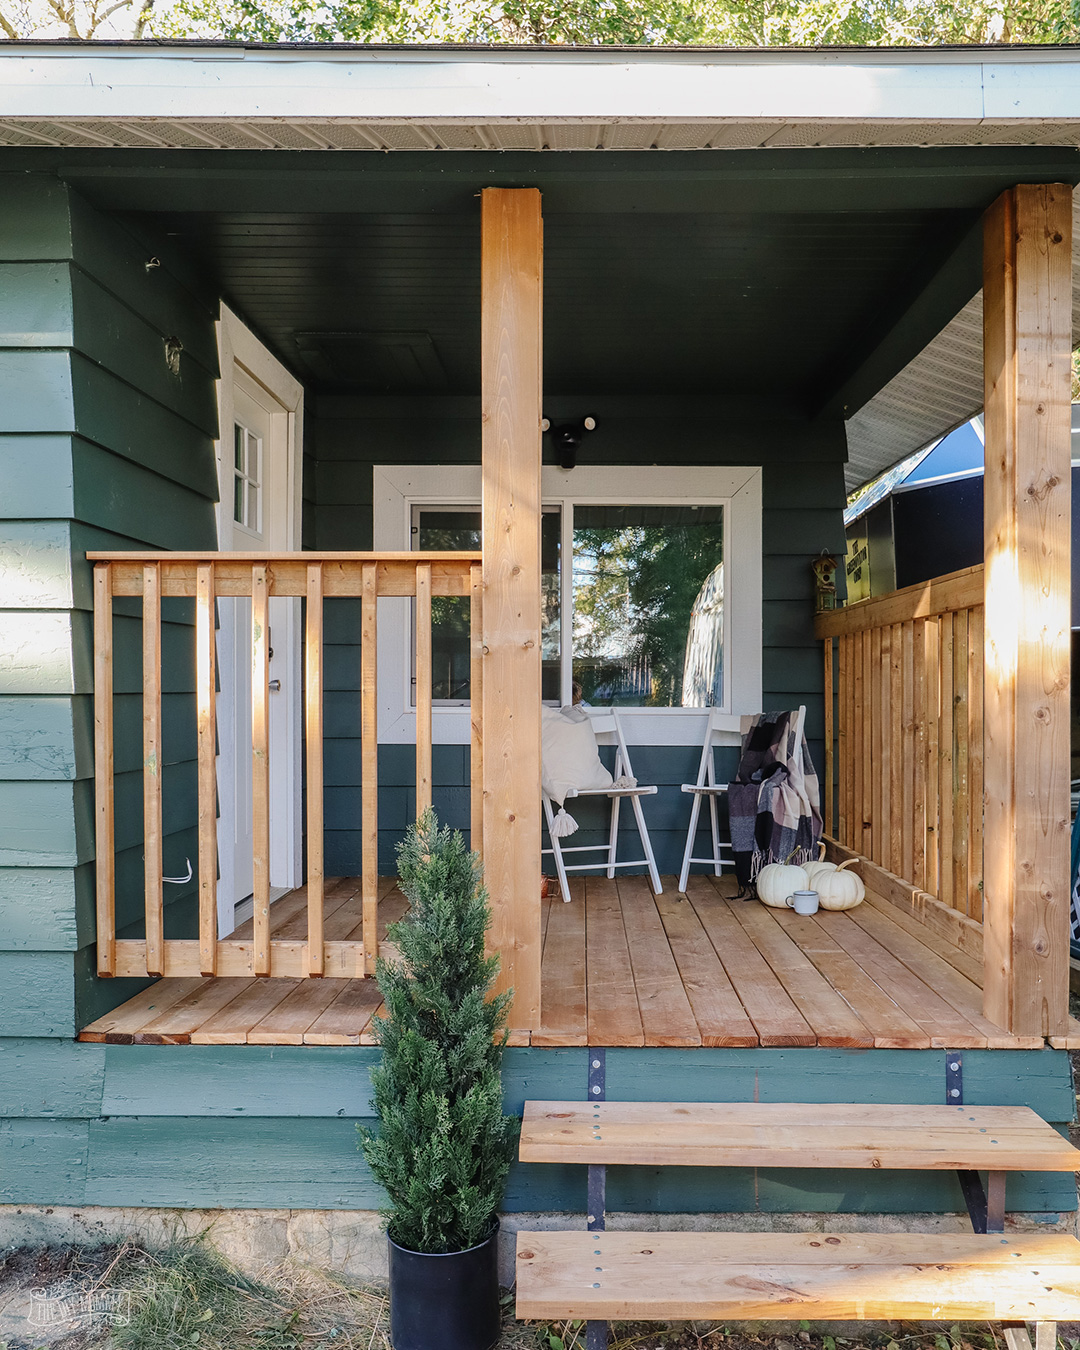 Before & After: Exterior Makeover of our Tiny Lake House